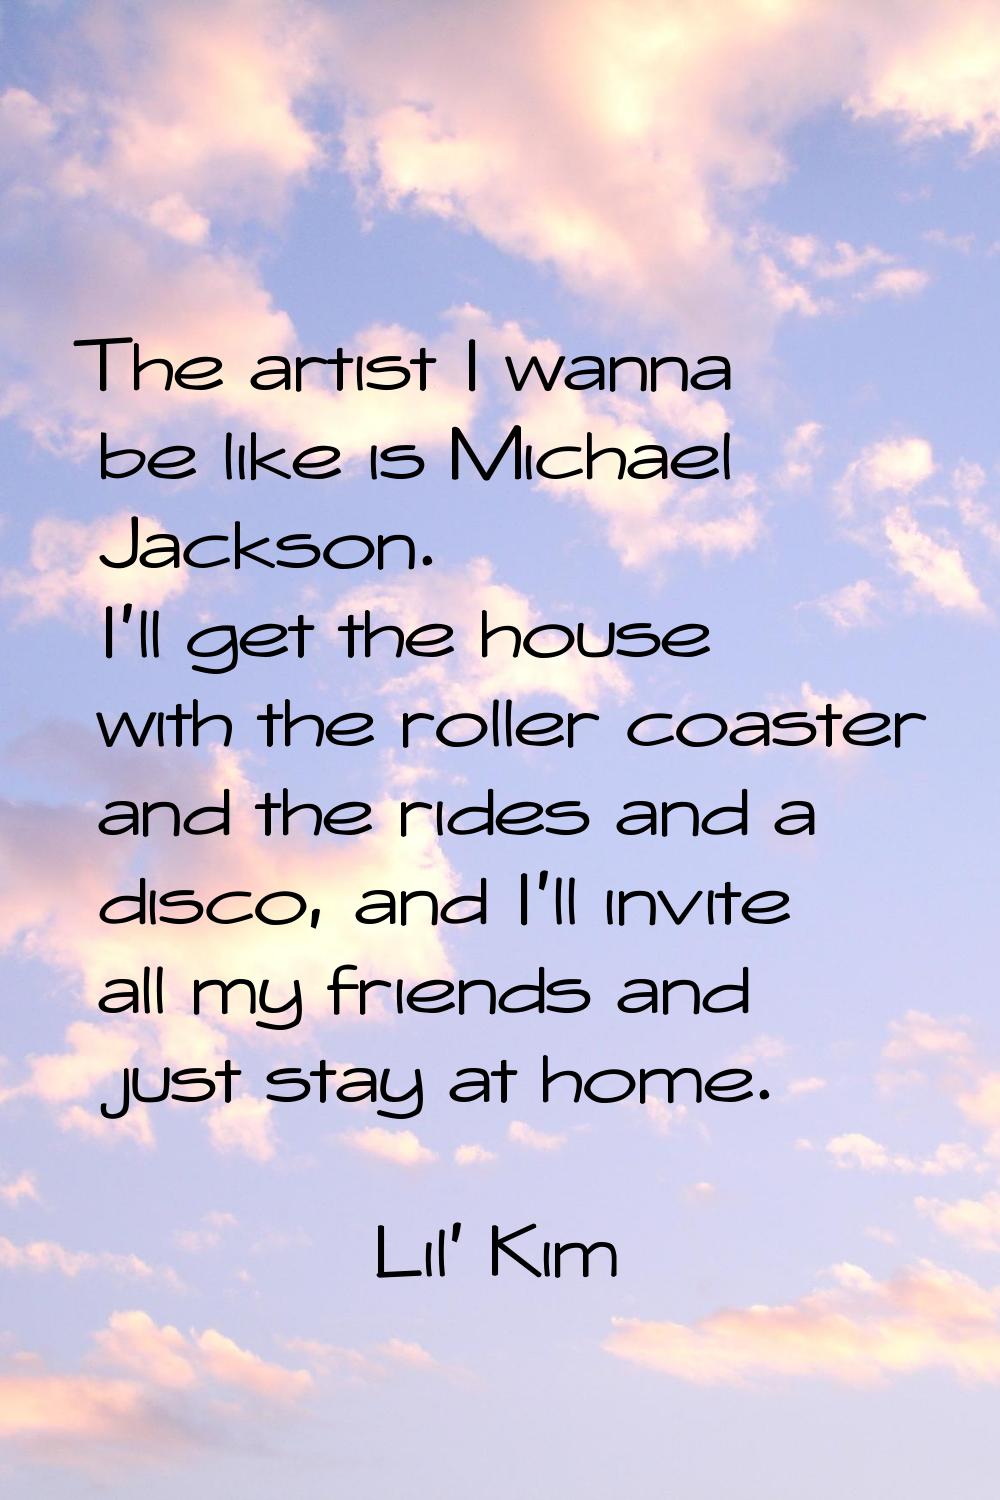 The artist I wanna be like is Michael Jackson. I'll get the house with the roller coaster and the r